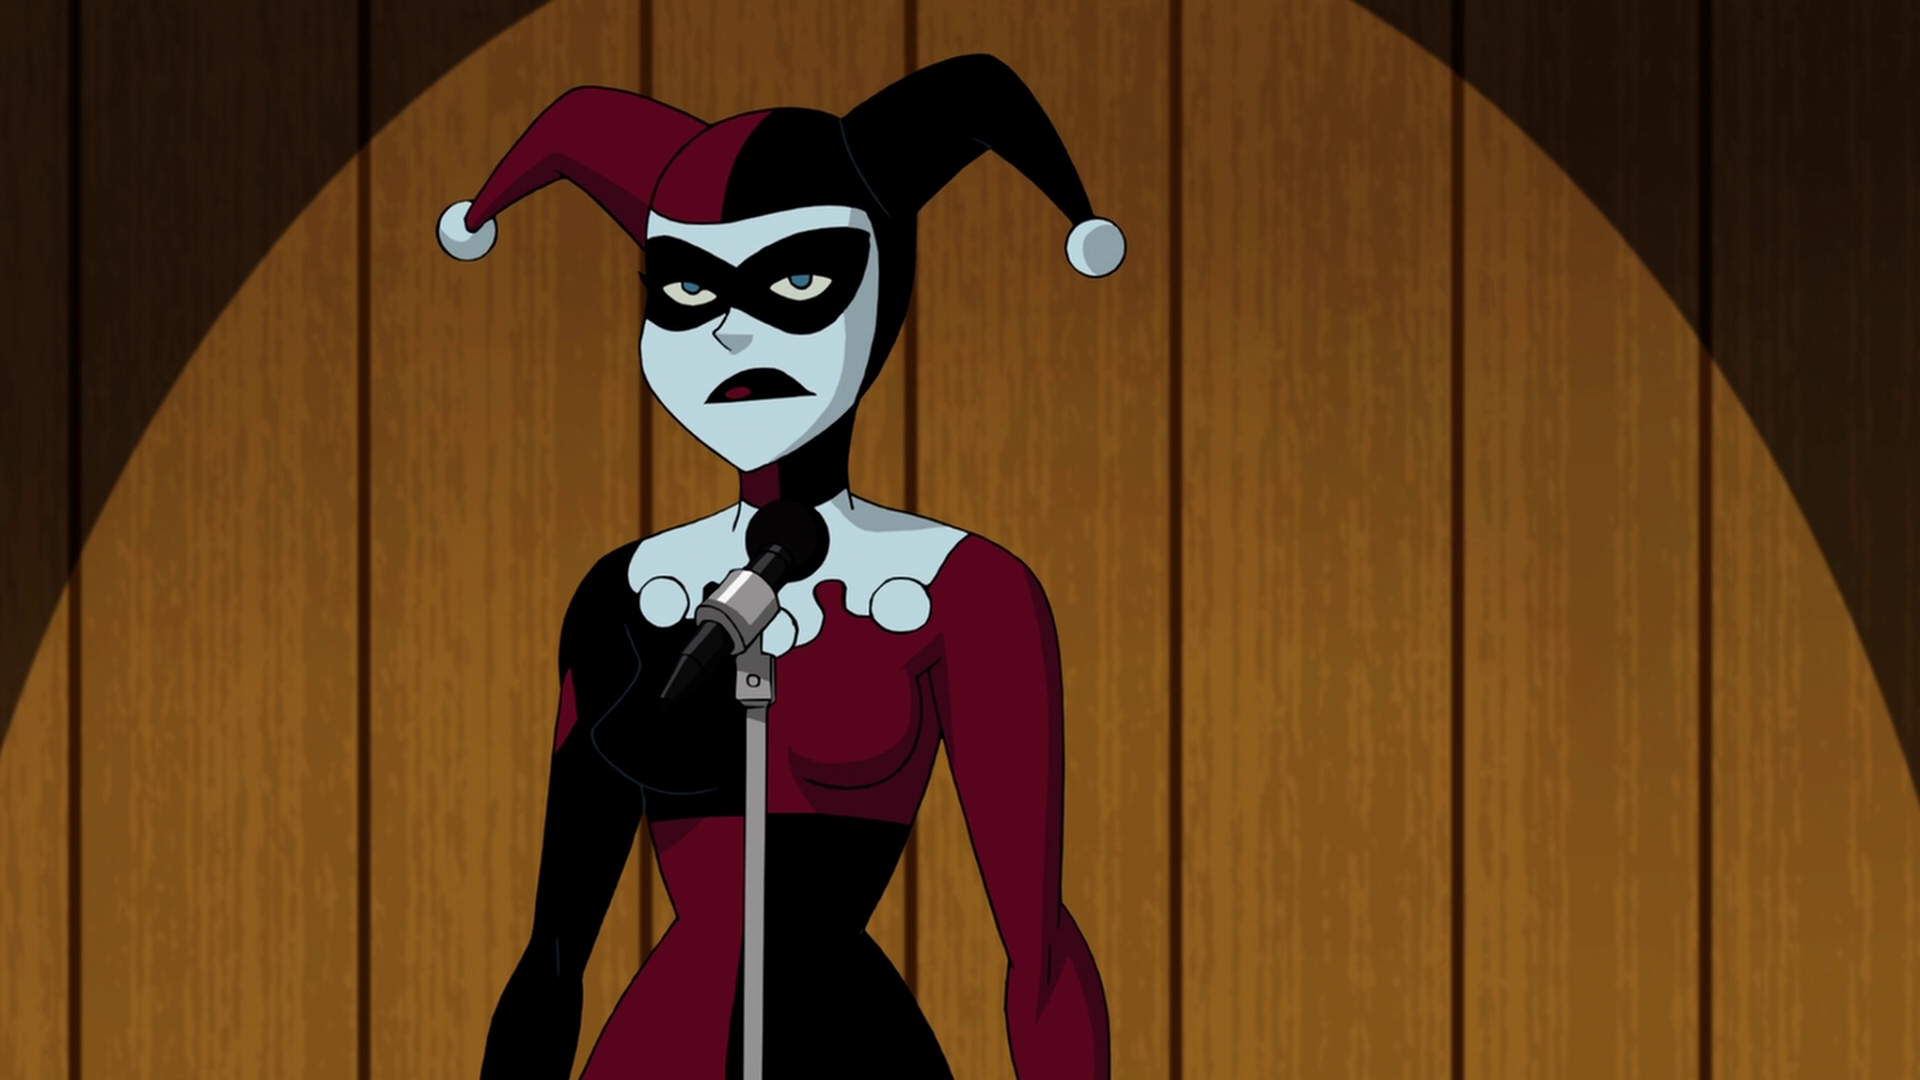 Continue below for an assortment of screengrabs from the Batman and Harley Quinn...